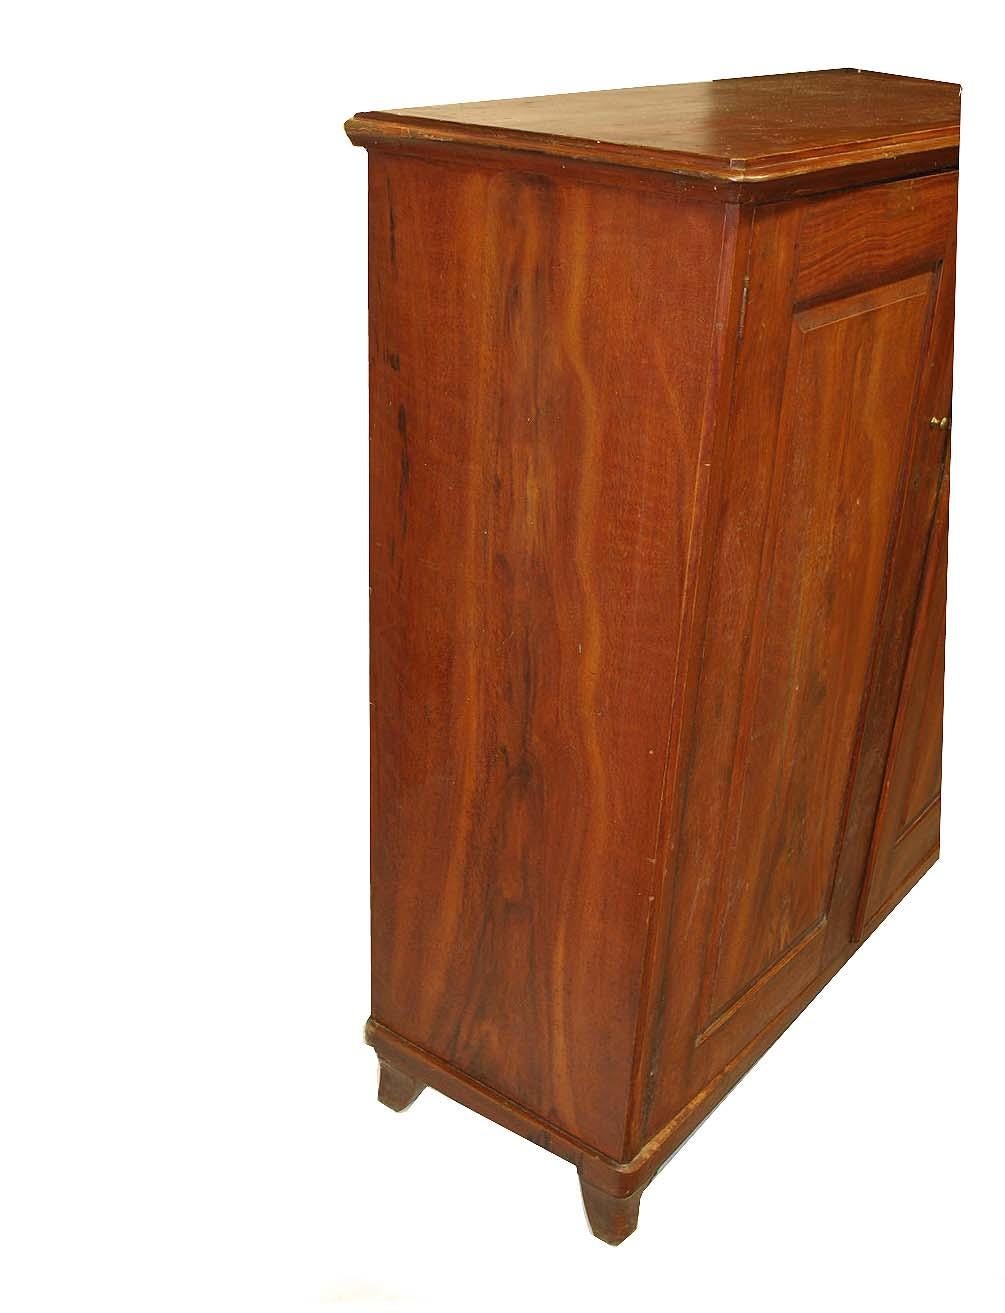 Grain painted two door cupboard, the top has straight grain paint , the doors, with raised exterior and interior raised panels, along with the sides, have a swirl grain paint design. The interior has four stationary shelves and the bottom for